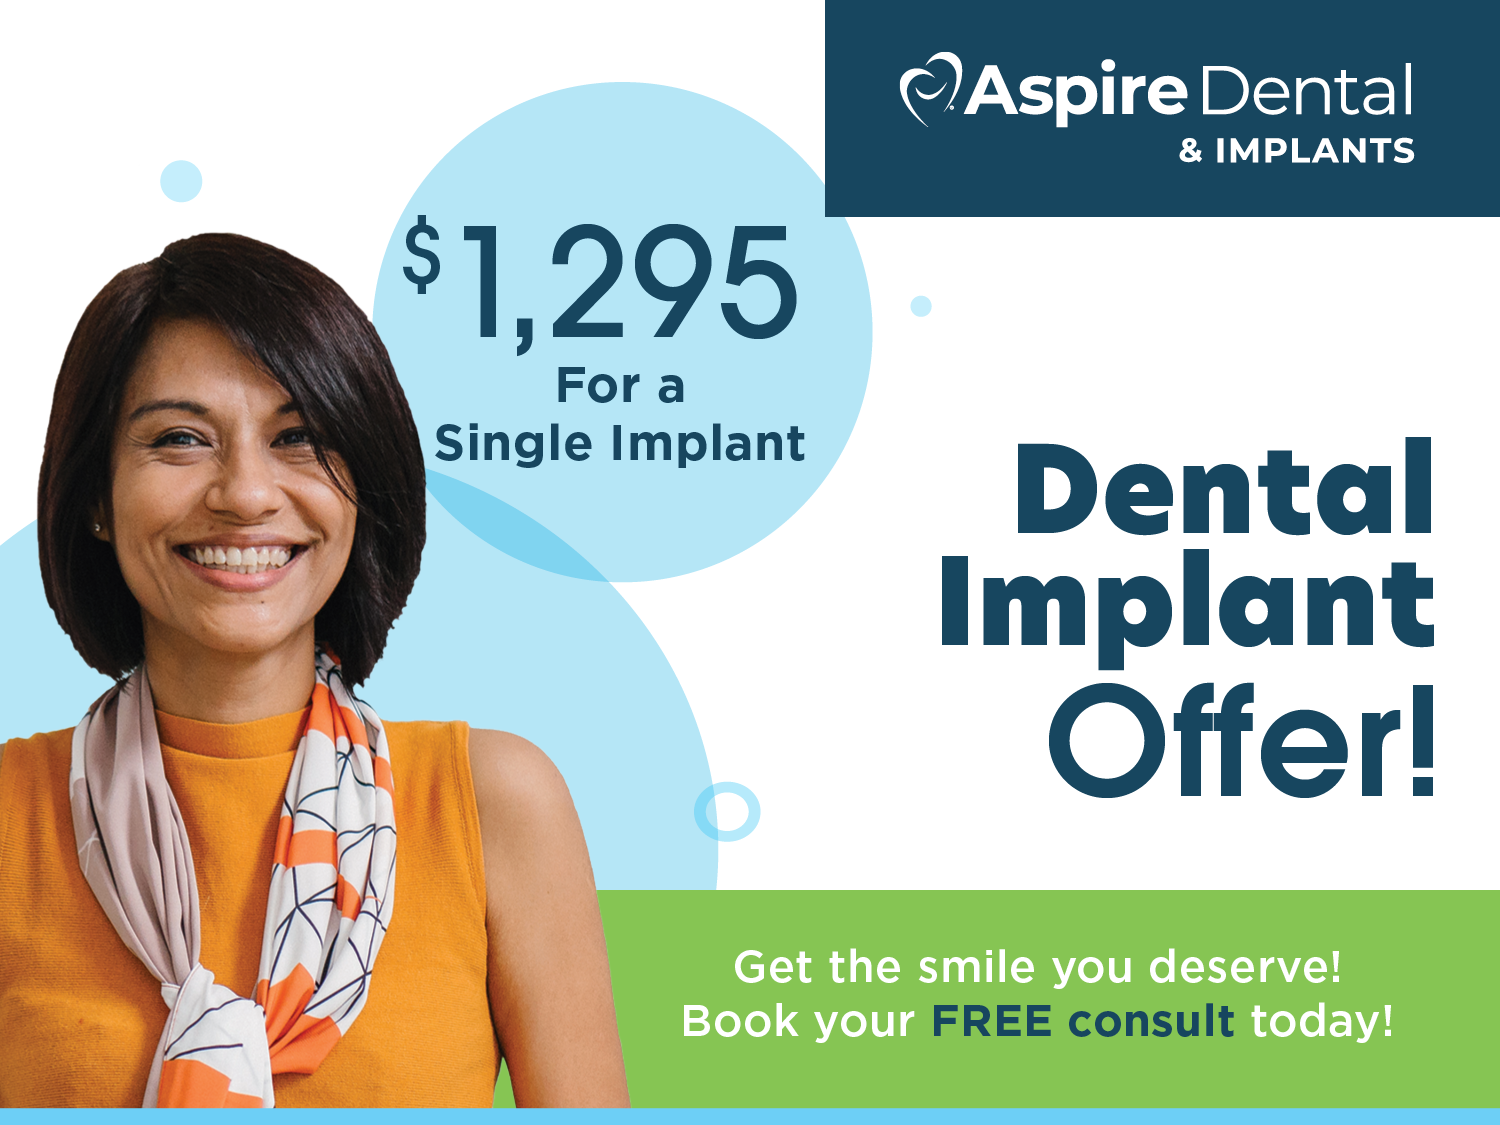 Ask about our $1295 for a single implant offer!